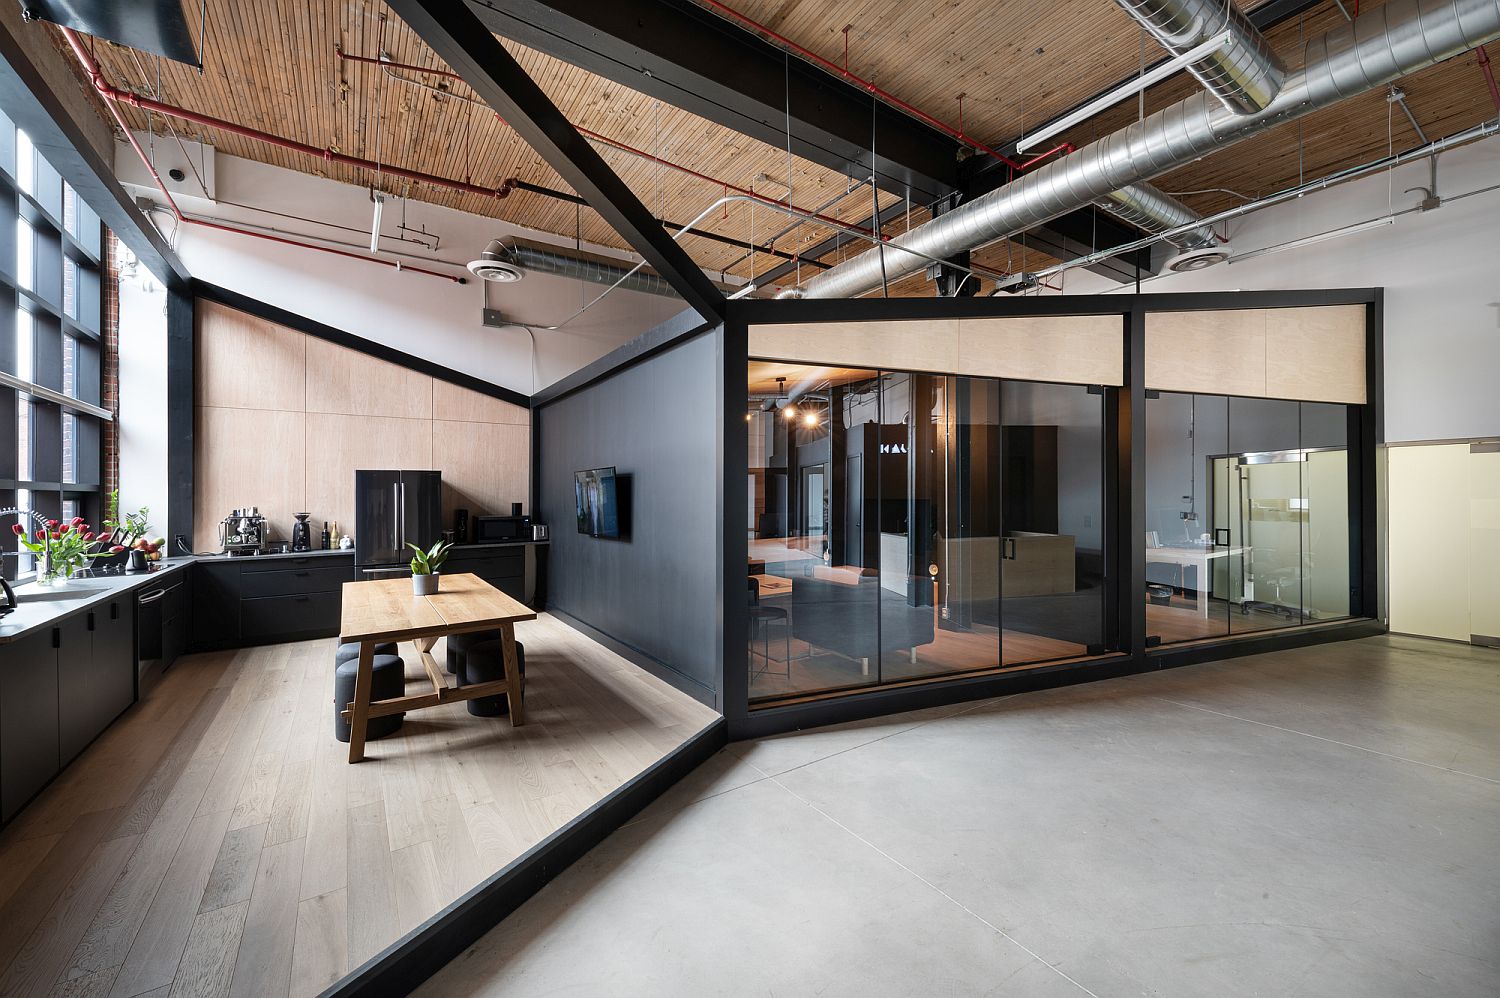 Office For Visual Effects Studio Combines Industrial Style With